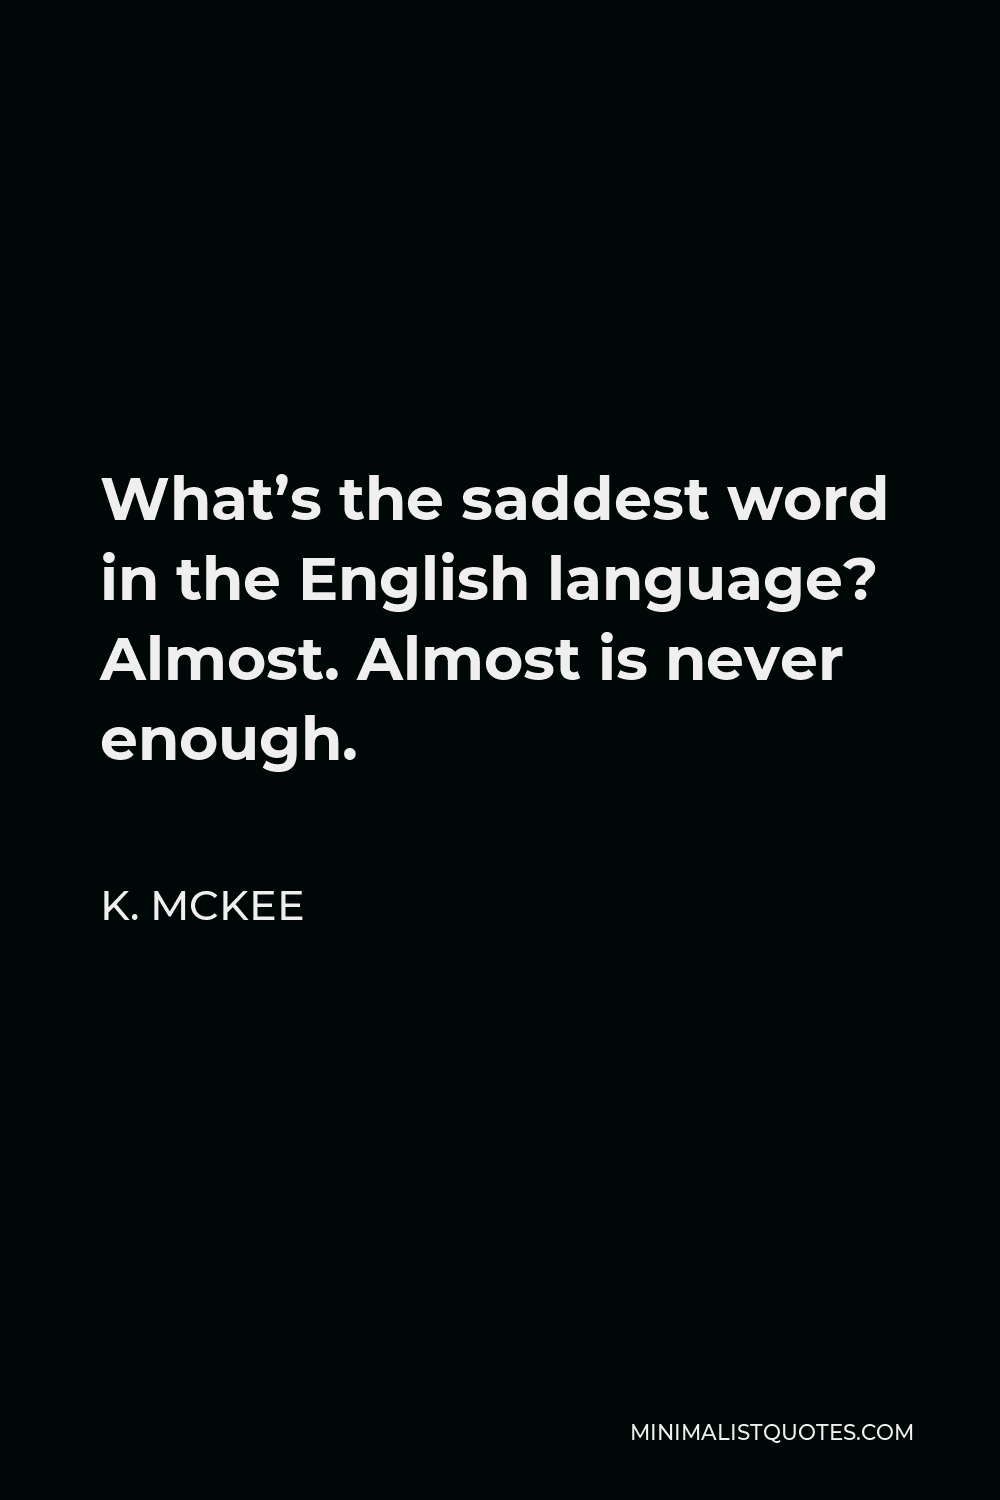 K. Mckee Quote - What’s the saddest word in the English language? Almost. Almost is never enough.